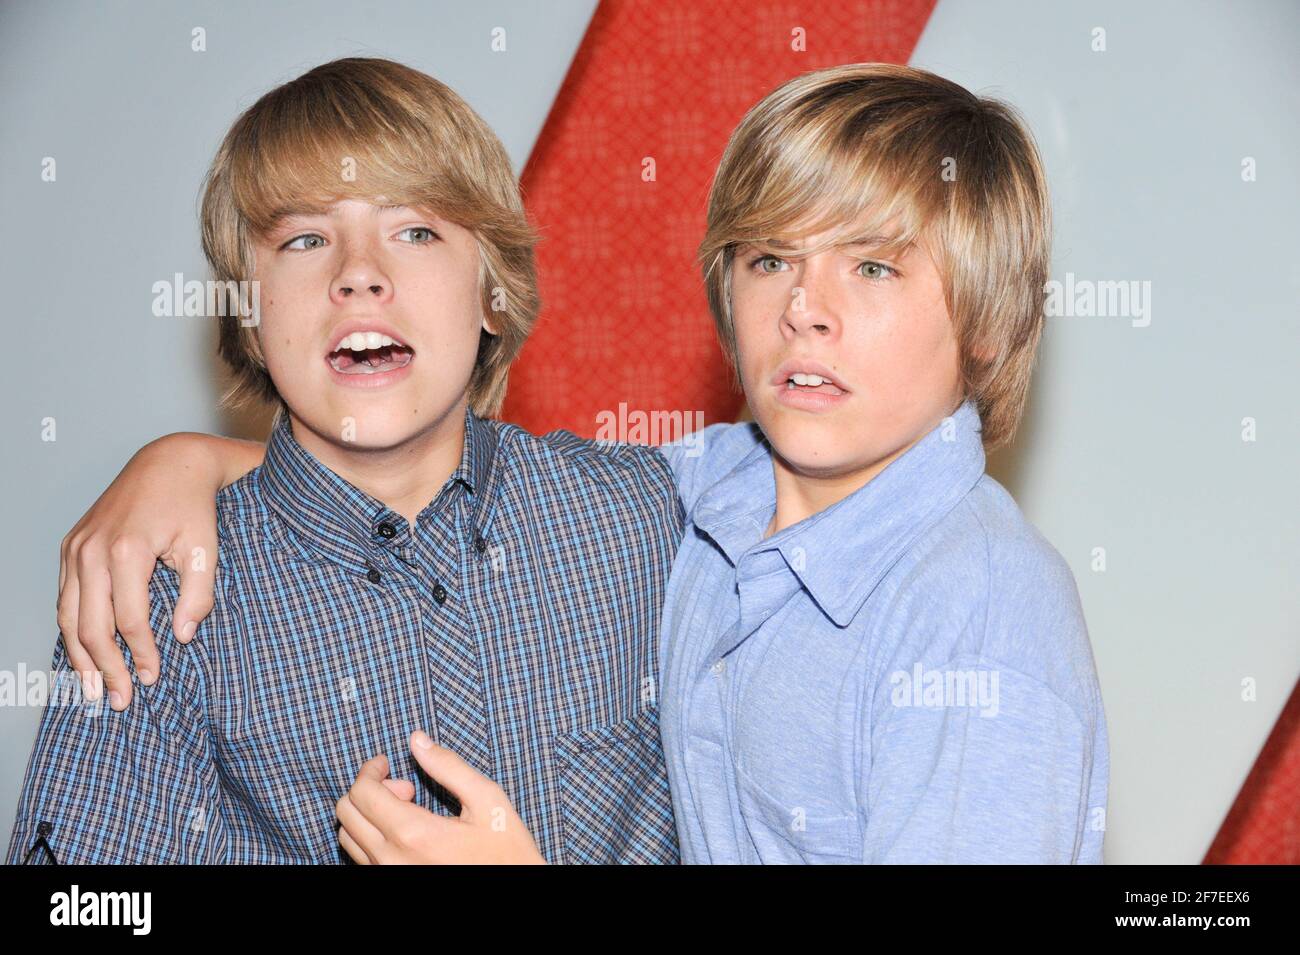 Actor's Cole Sprouse and Dylan Sprouse attends arrivals for the 6th annual Teen Vogue Young Hollywood Party at Los Angeles County Museum of Art on September 18, 2008 in Los Angeles, California. Credtit: Jared Milgrim Stock Photo